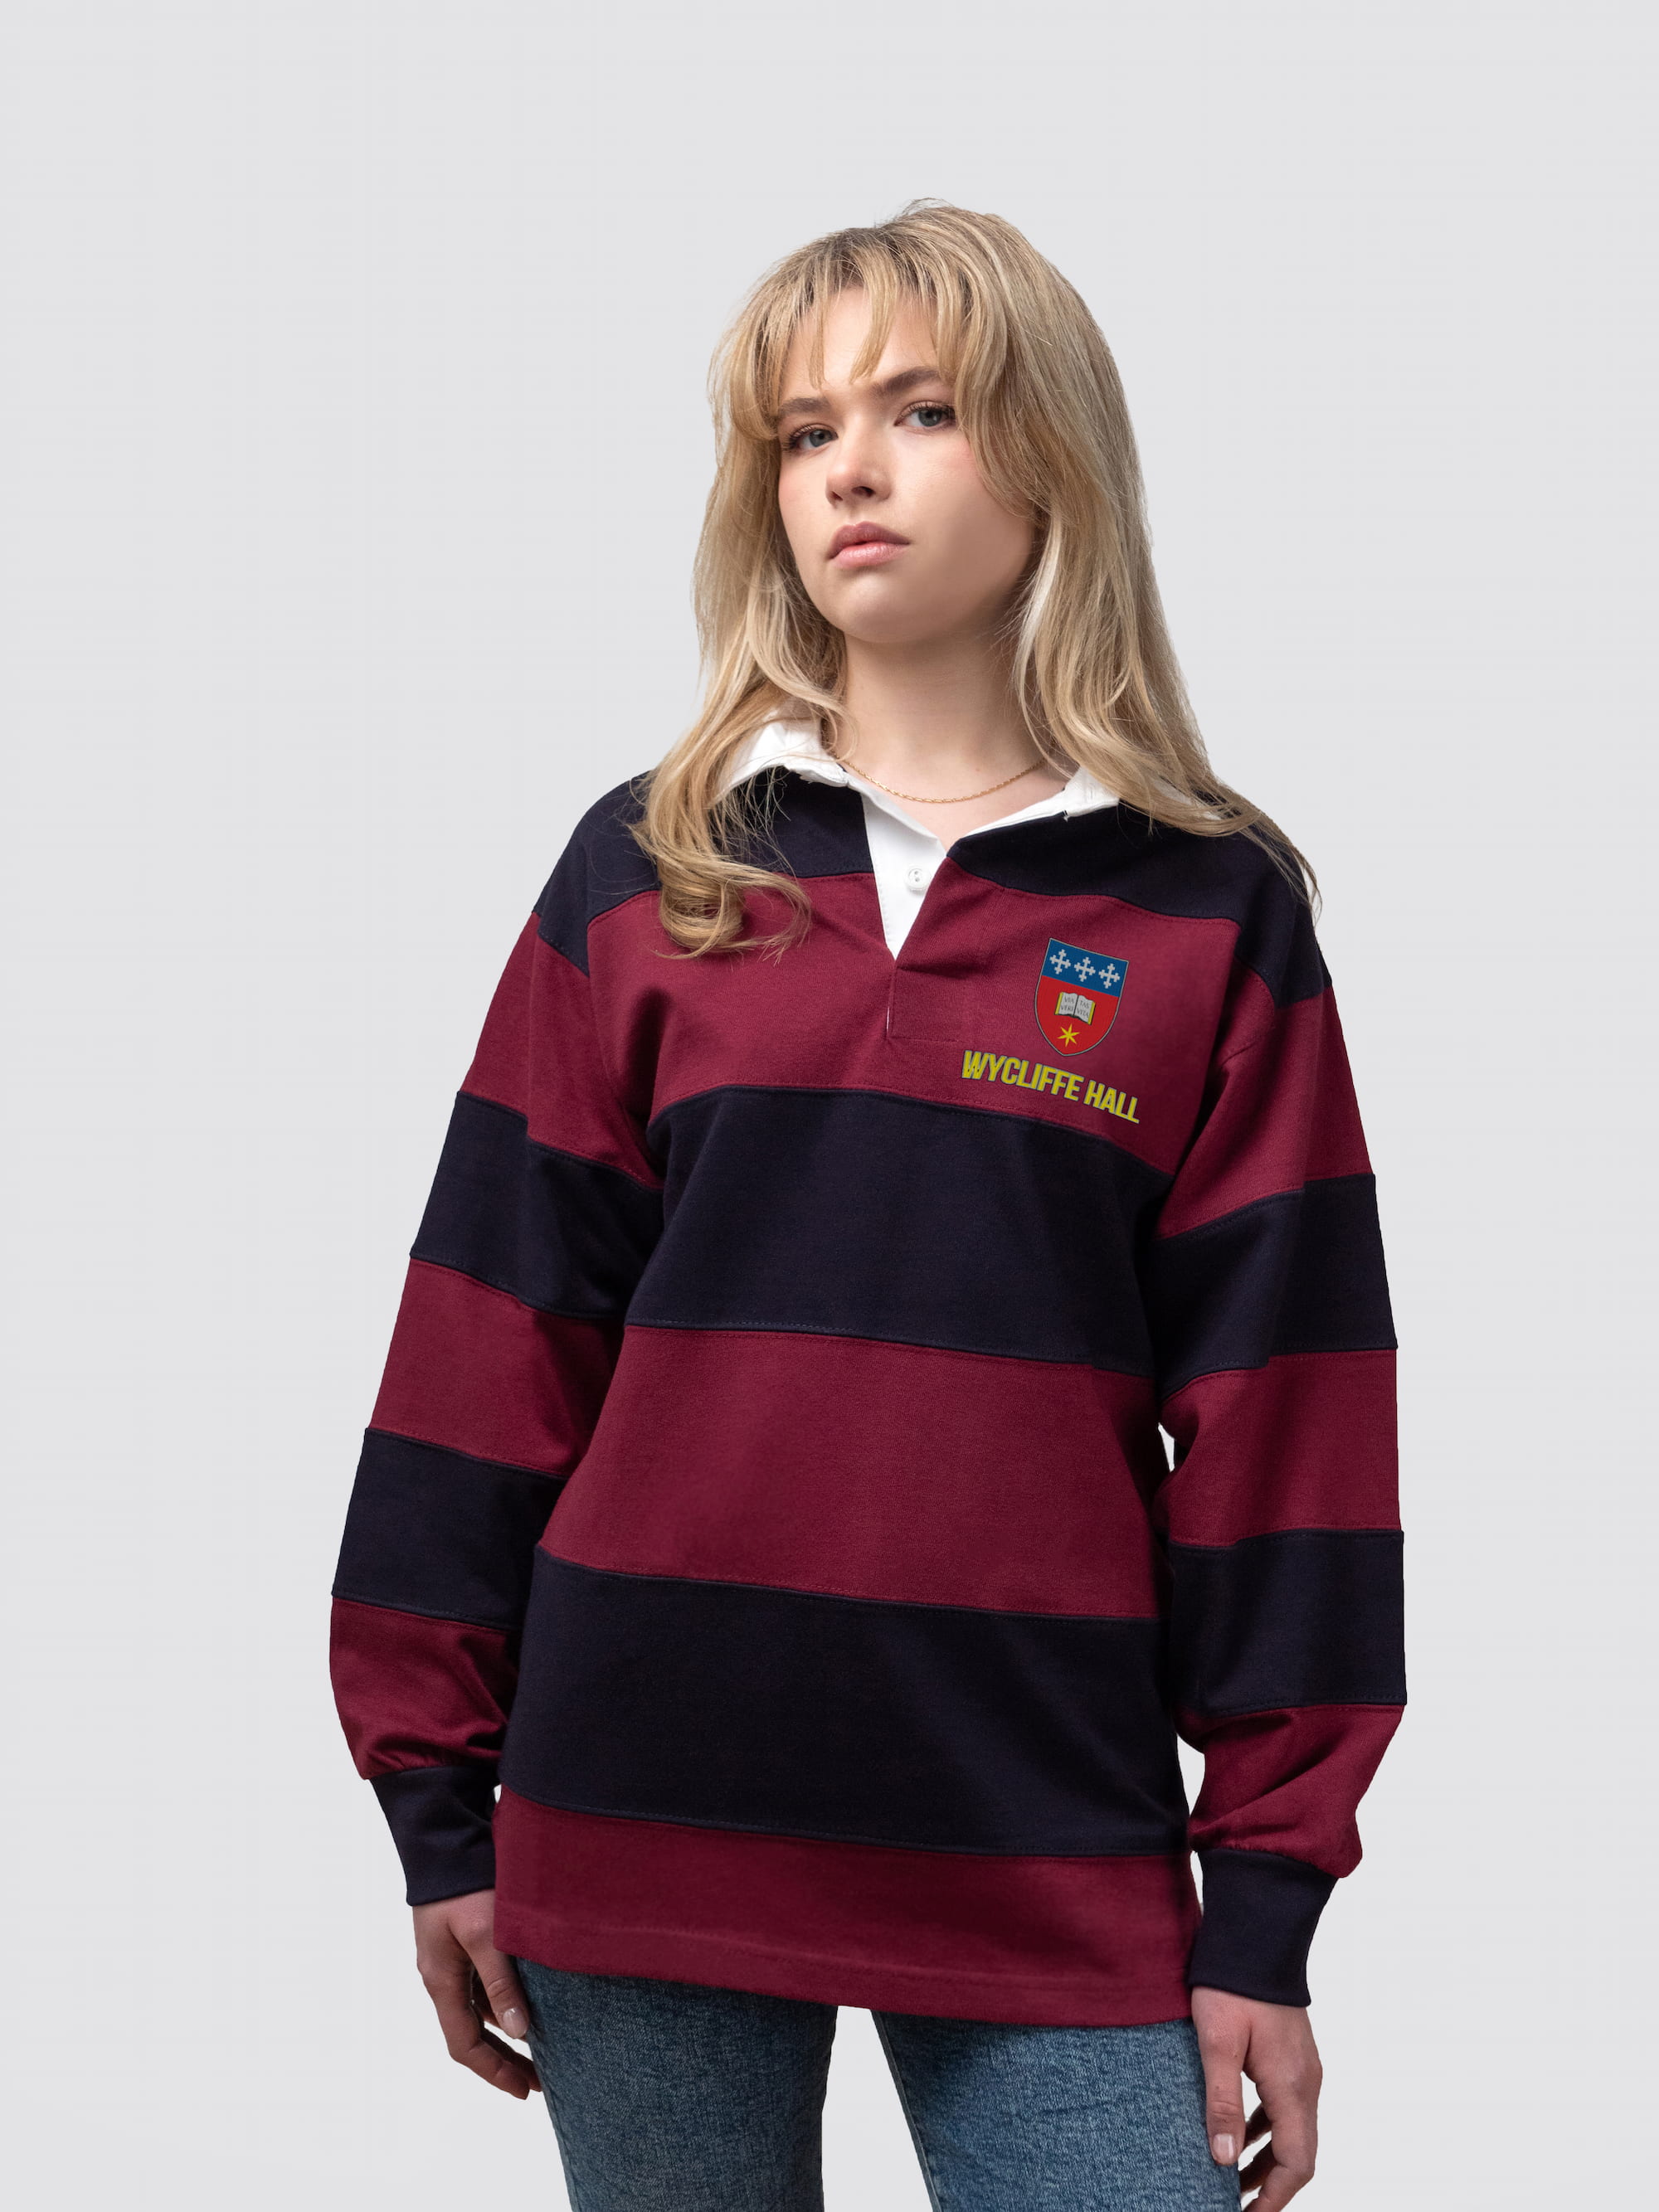 Wycliffe Hall College rugby shirt, with burgundy and navy stripes